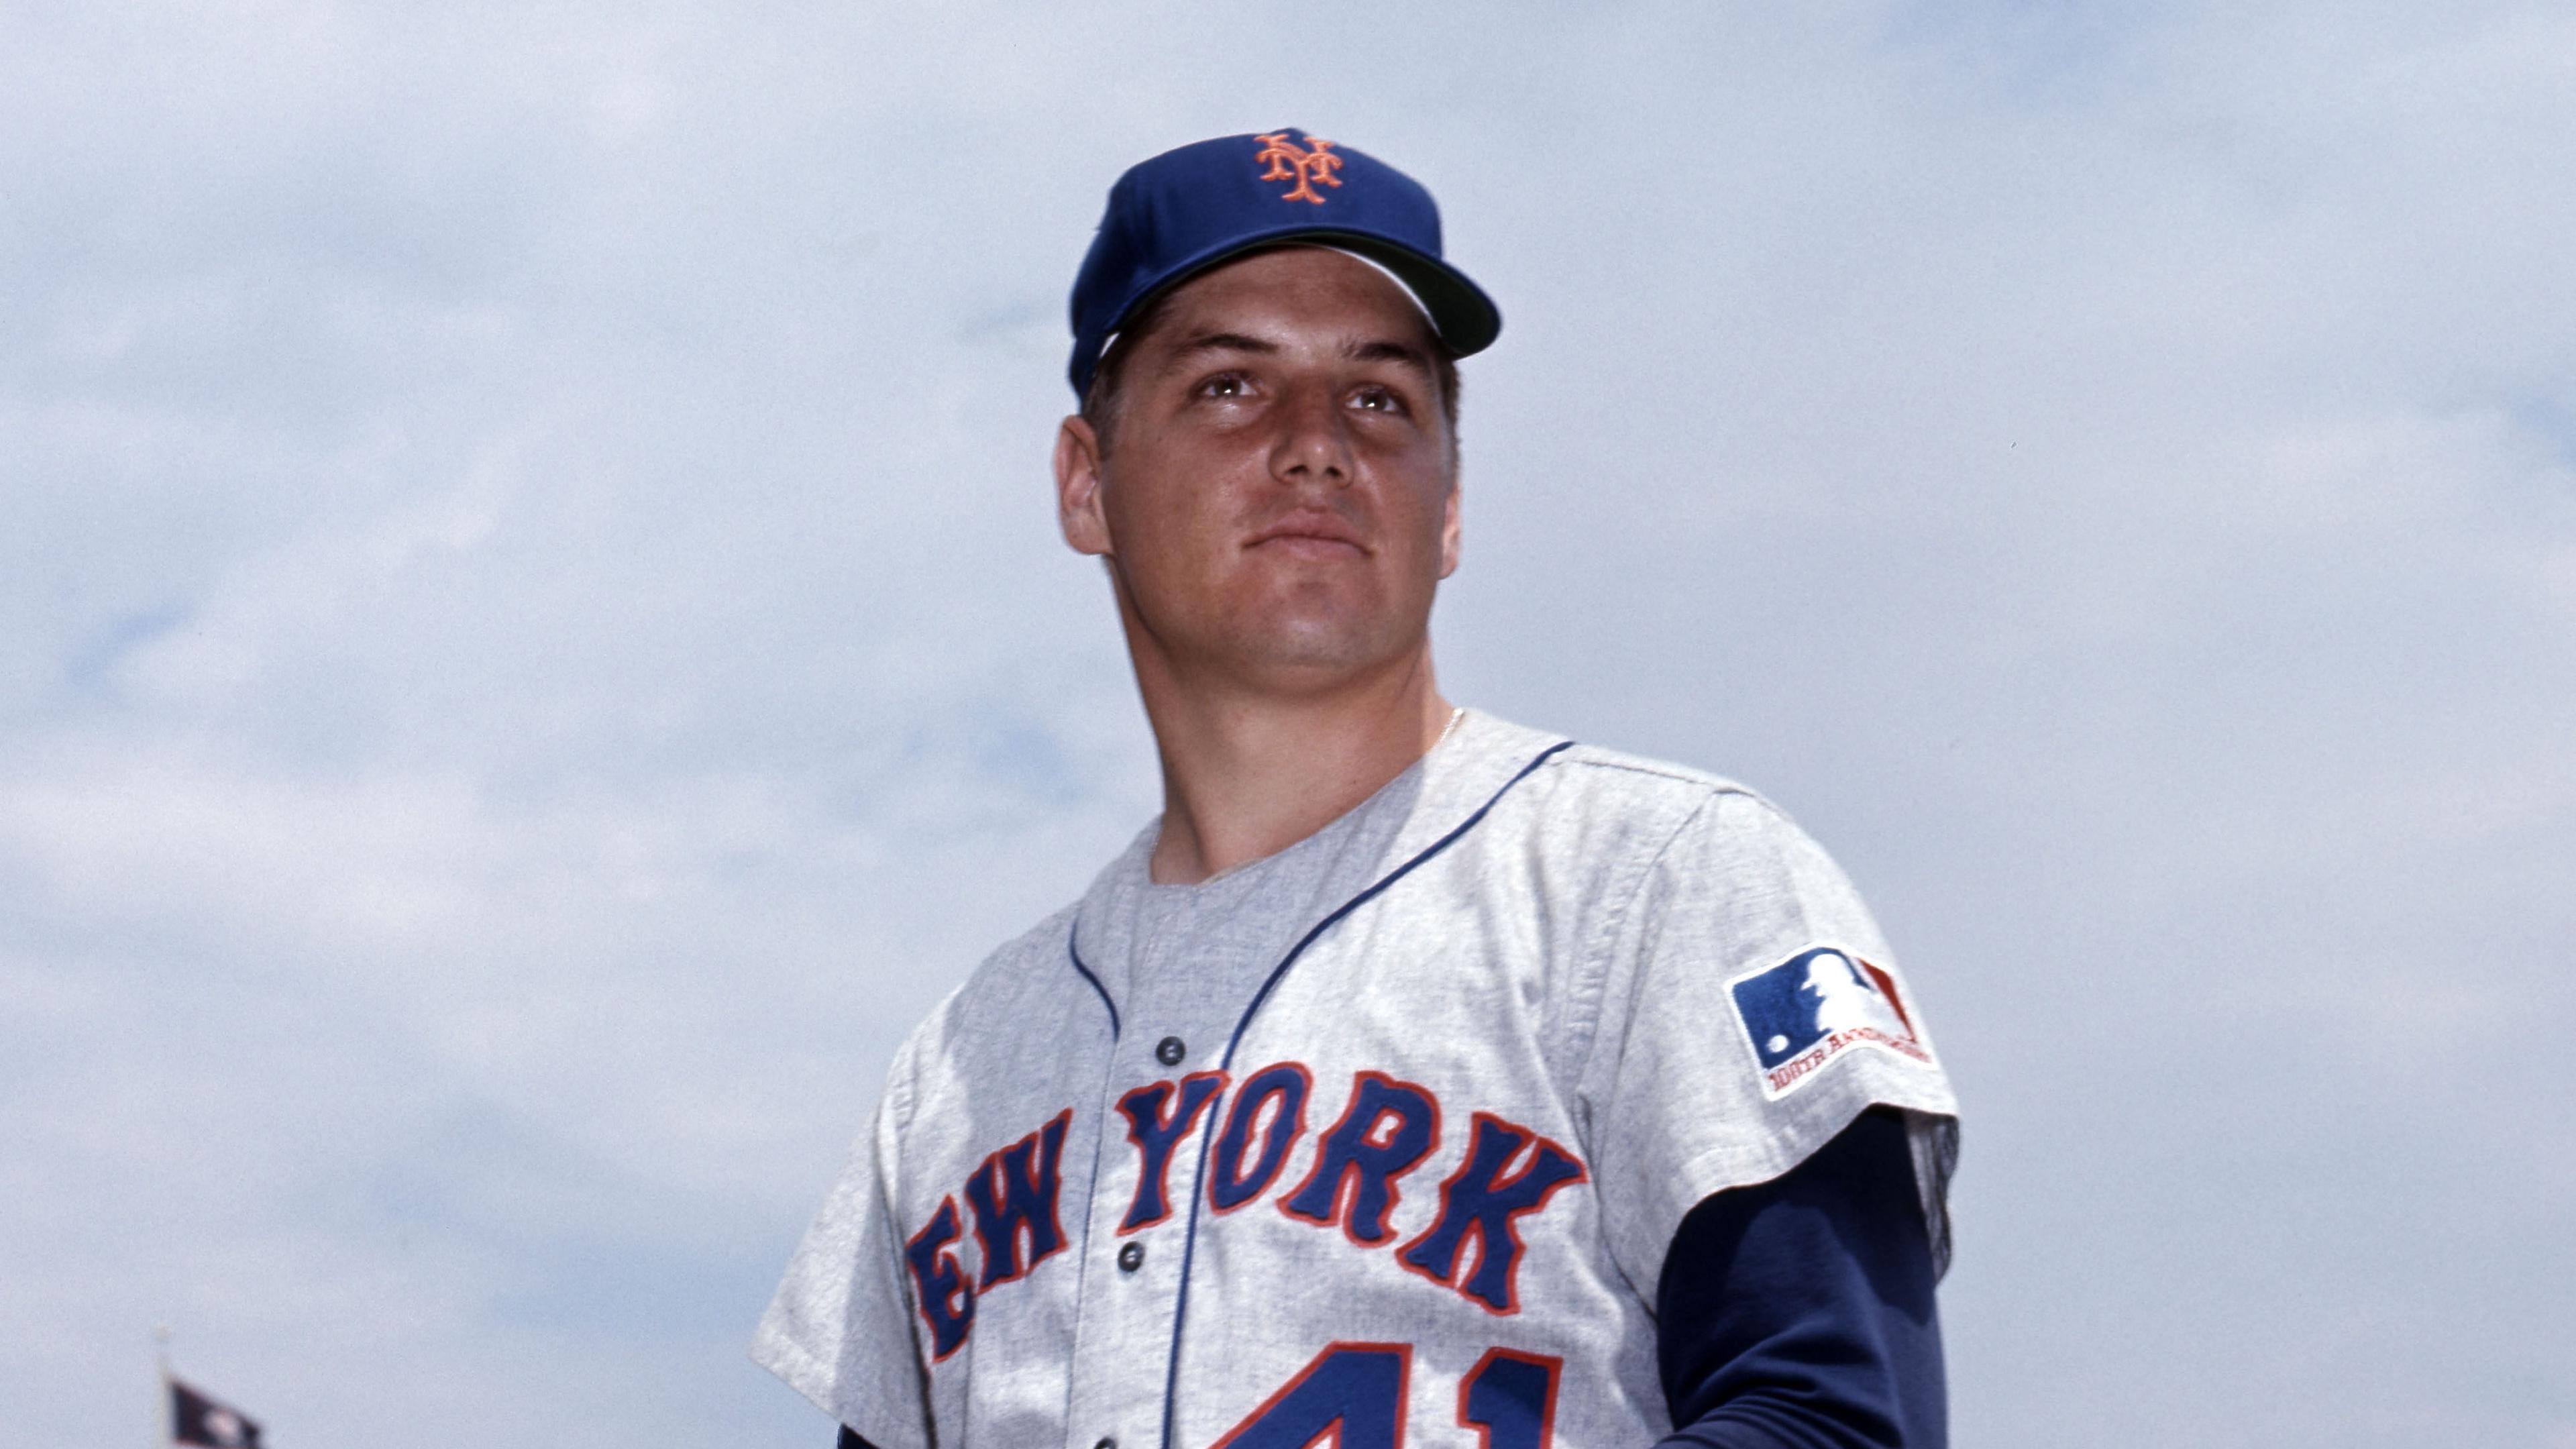 New York Mets pitcher Tom Seaver(41) poses for a portrait at Crosley Field / Malcolm Emmons-USA TODAY Sports